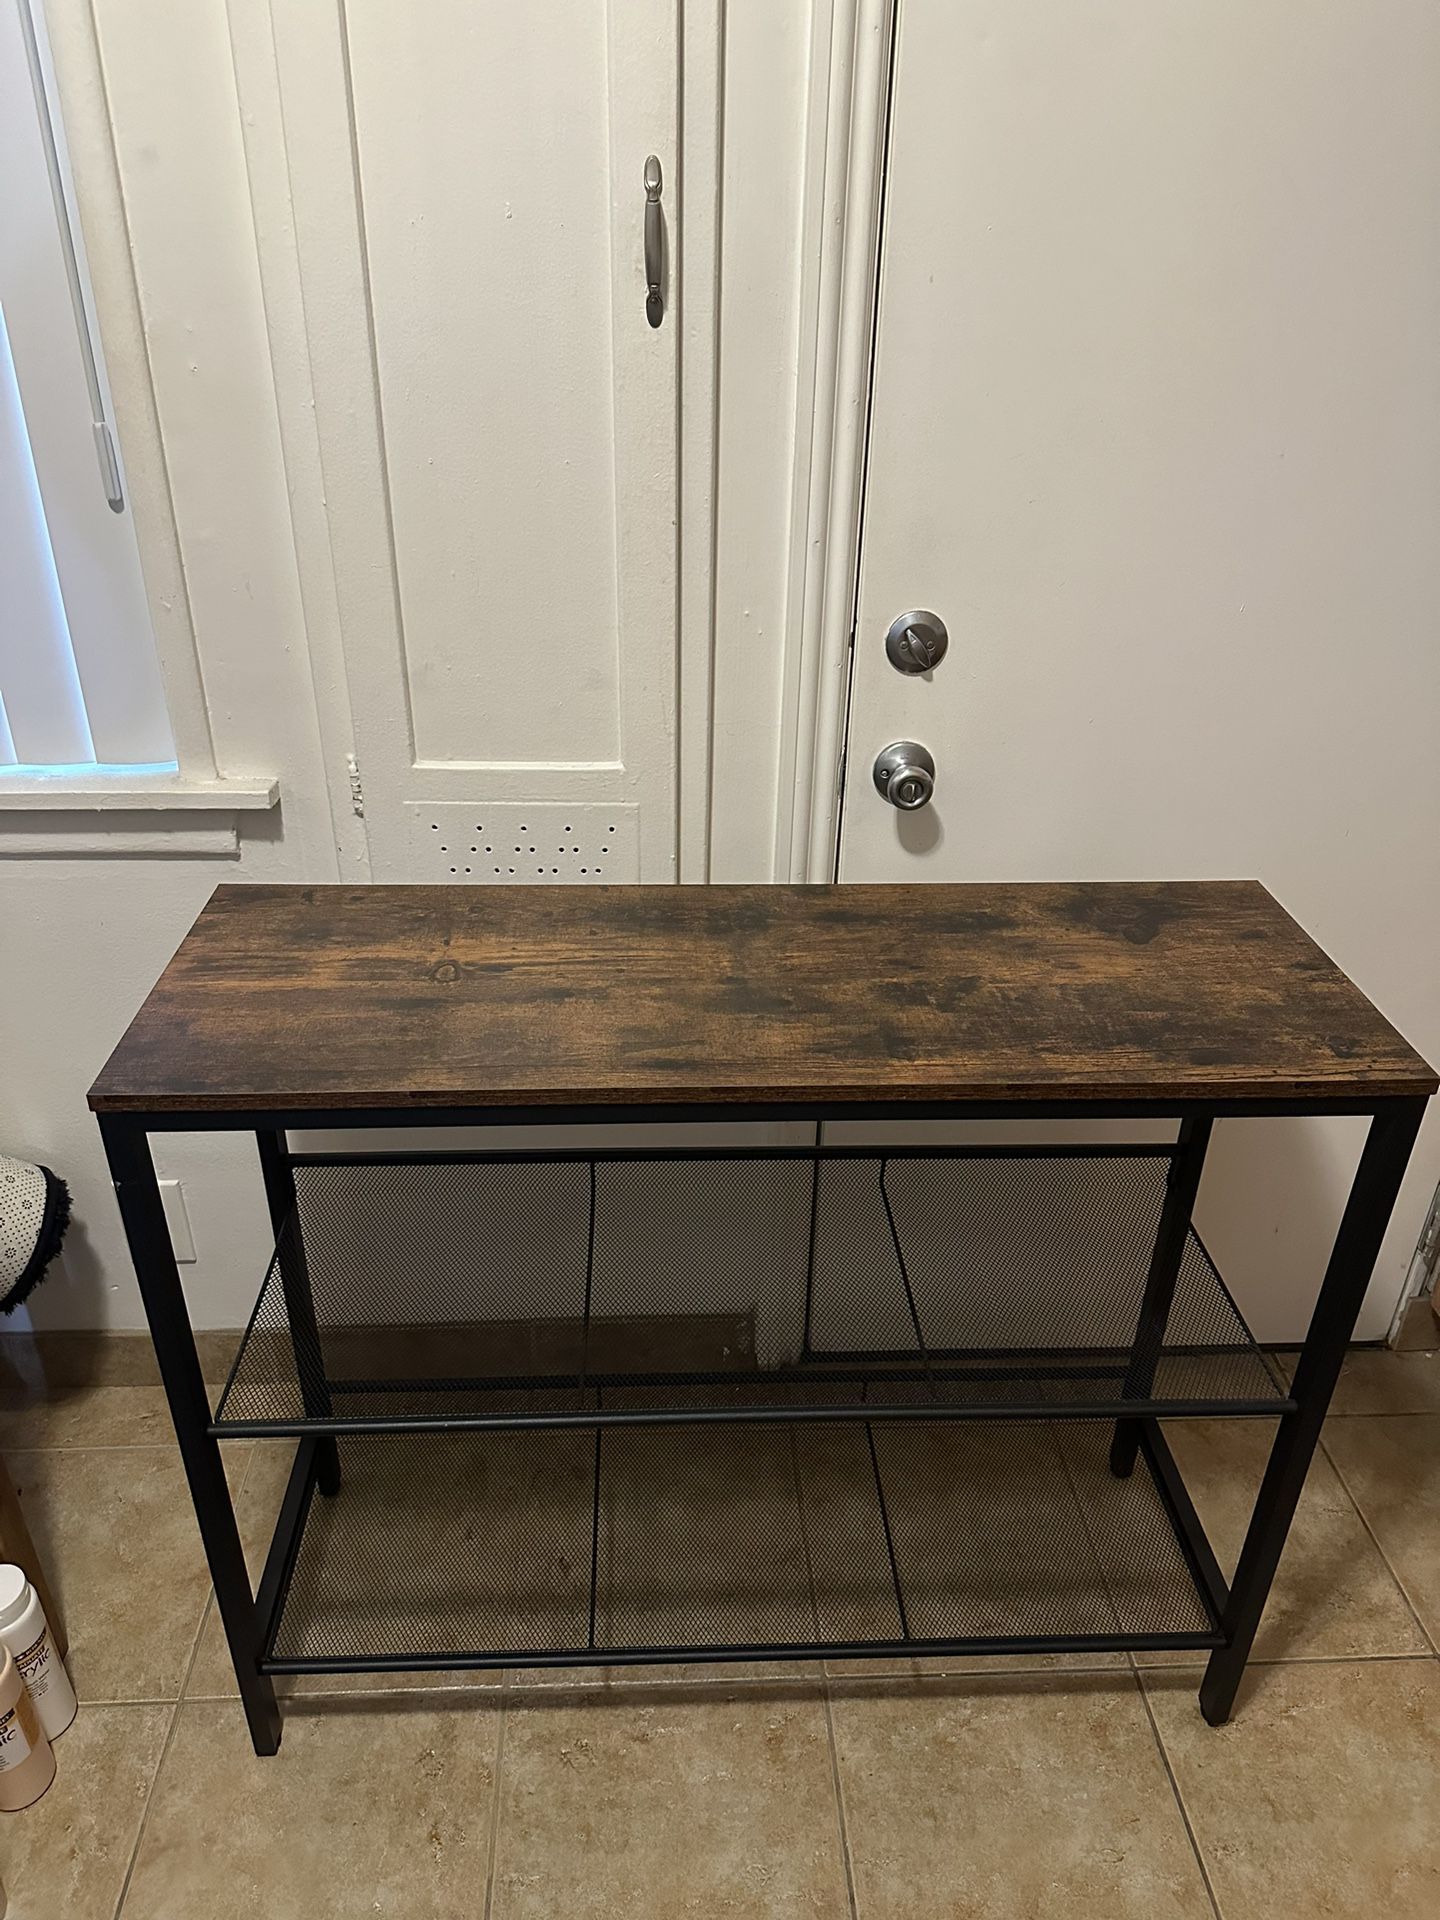 Multi Purpose Table With Shelves